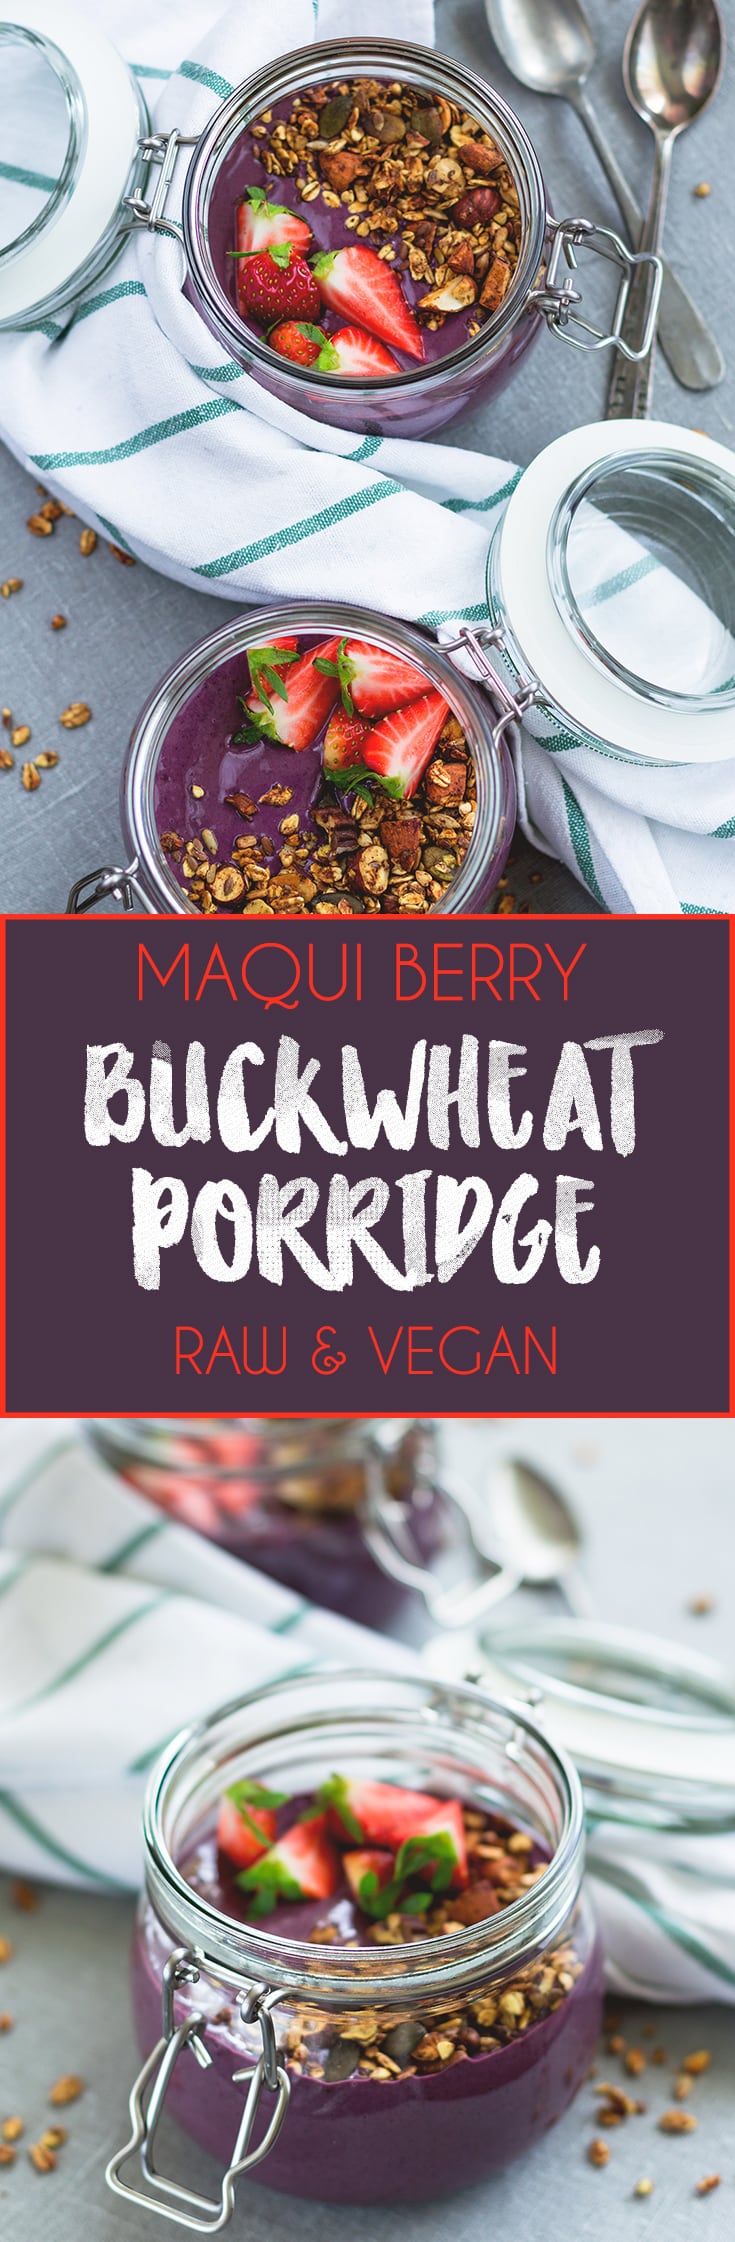 Raw Maqui Berry Buckwheat Porridge - raw soaked buckwheat, maqui berry powder, cacao, frozen berries, and a couple more delicious ingredients. I love this recipe, it's my go to breafast! So easy, healthy, and satisfying! | thehealthfulideas.com